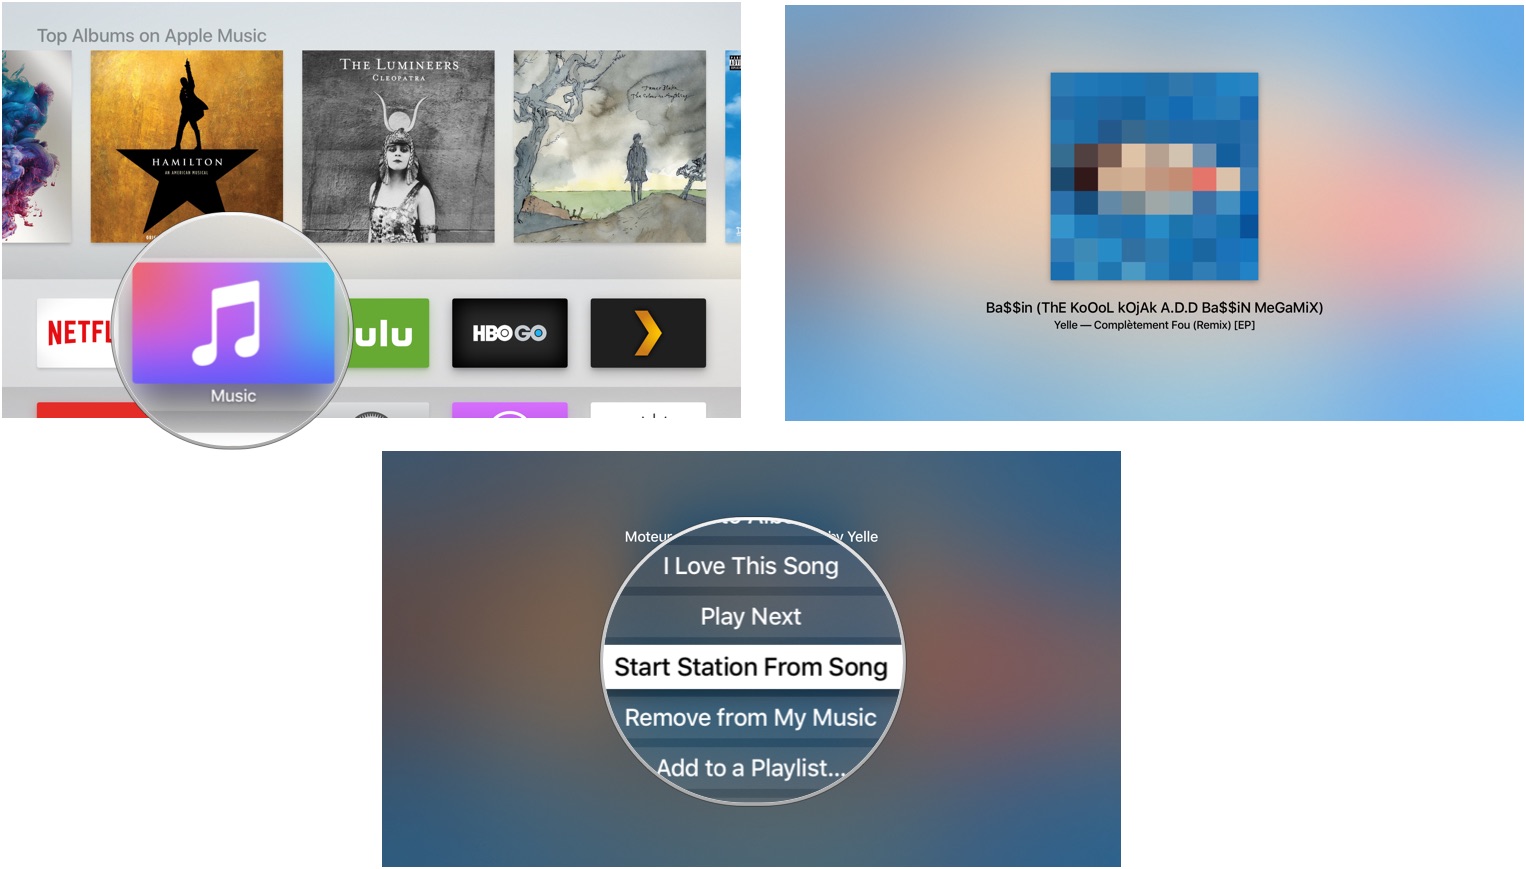 Starting a station based on a song in Apple Music on Apple TV